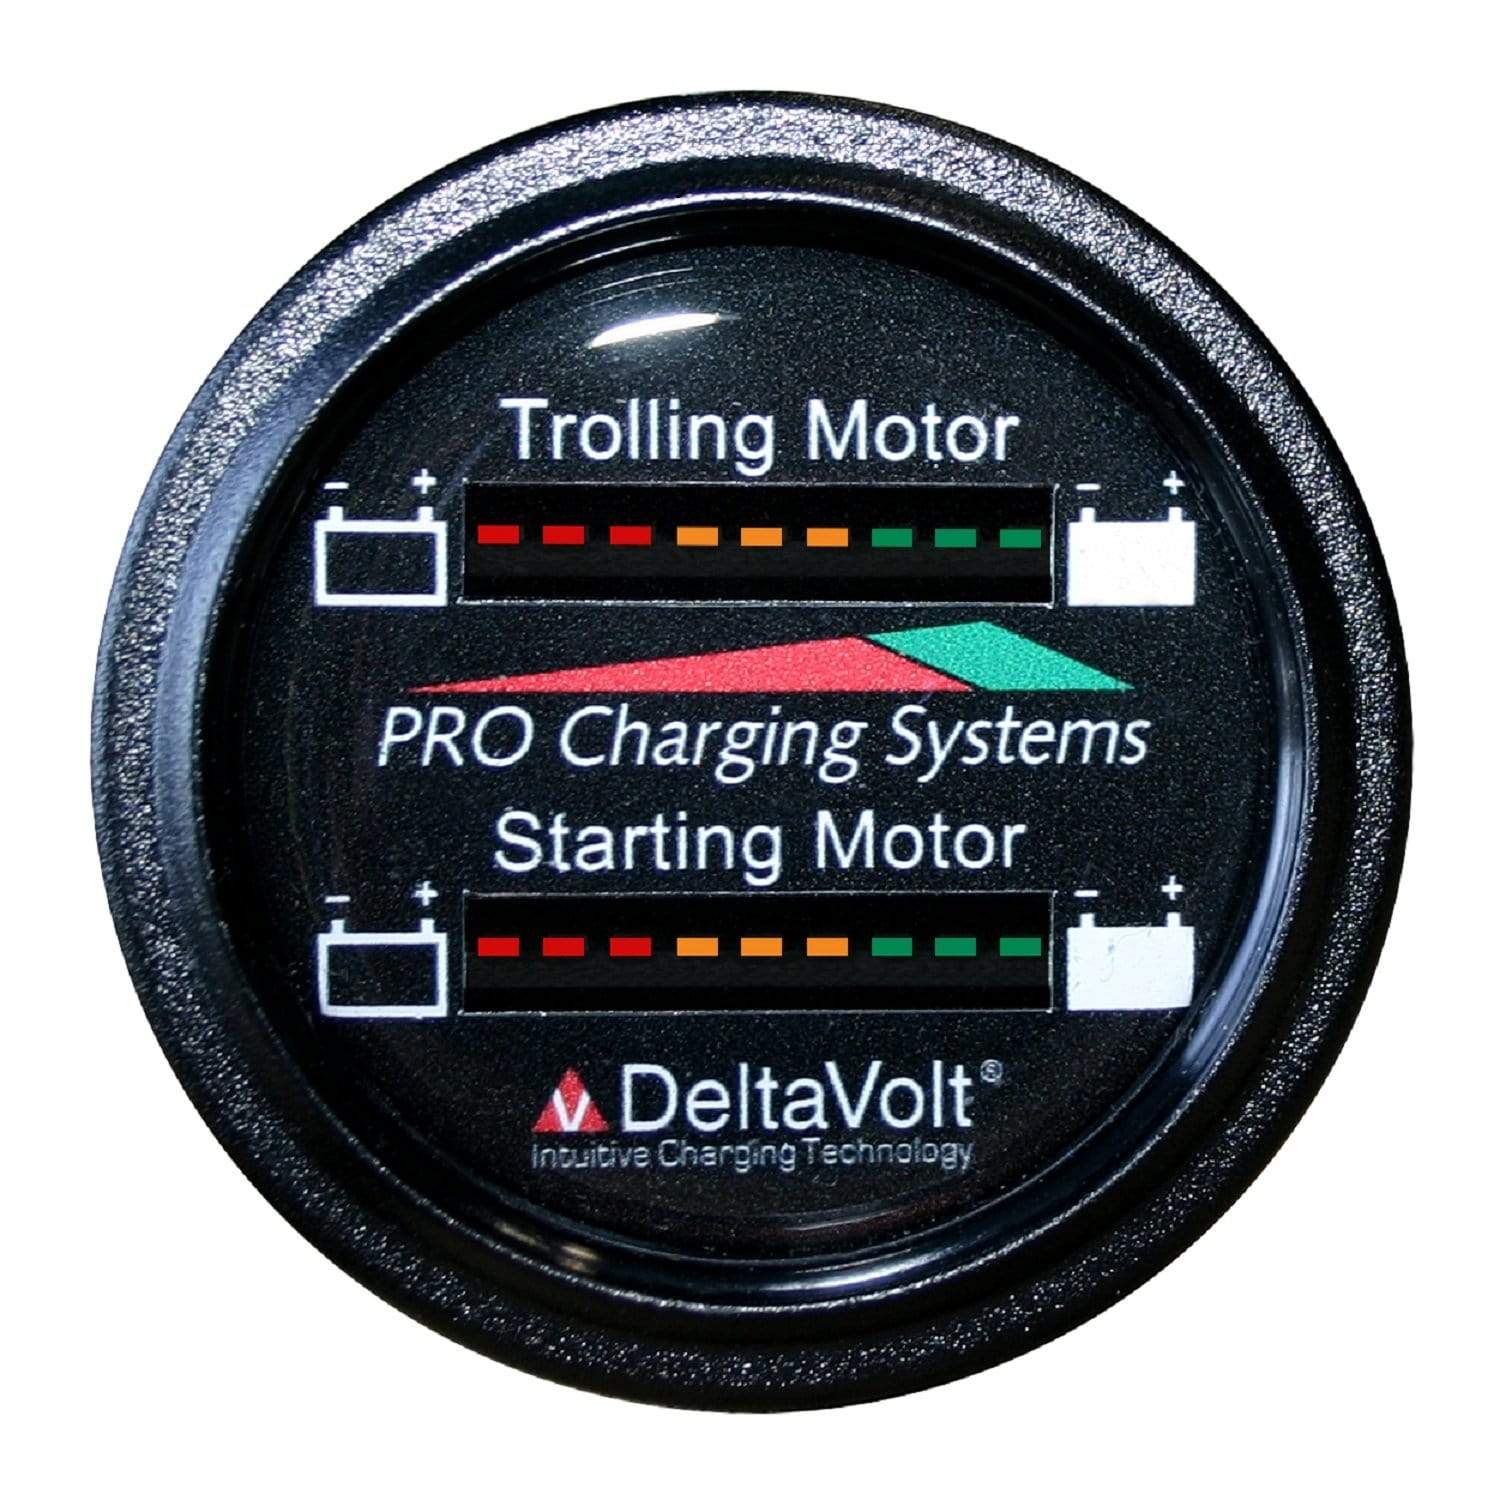 Pro Charging Systems Marine/Water Sports : Batteries & Chargers Dual Pro Dual Battery Fuel Gauge 24V Trolling 12V Starting